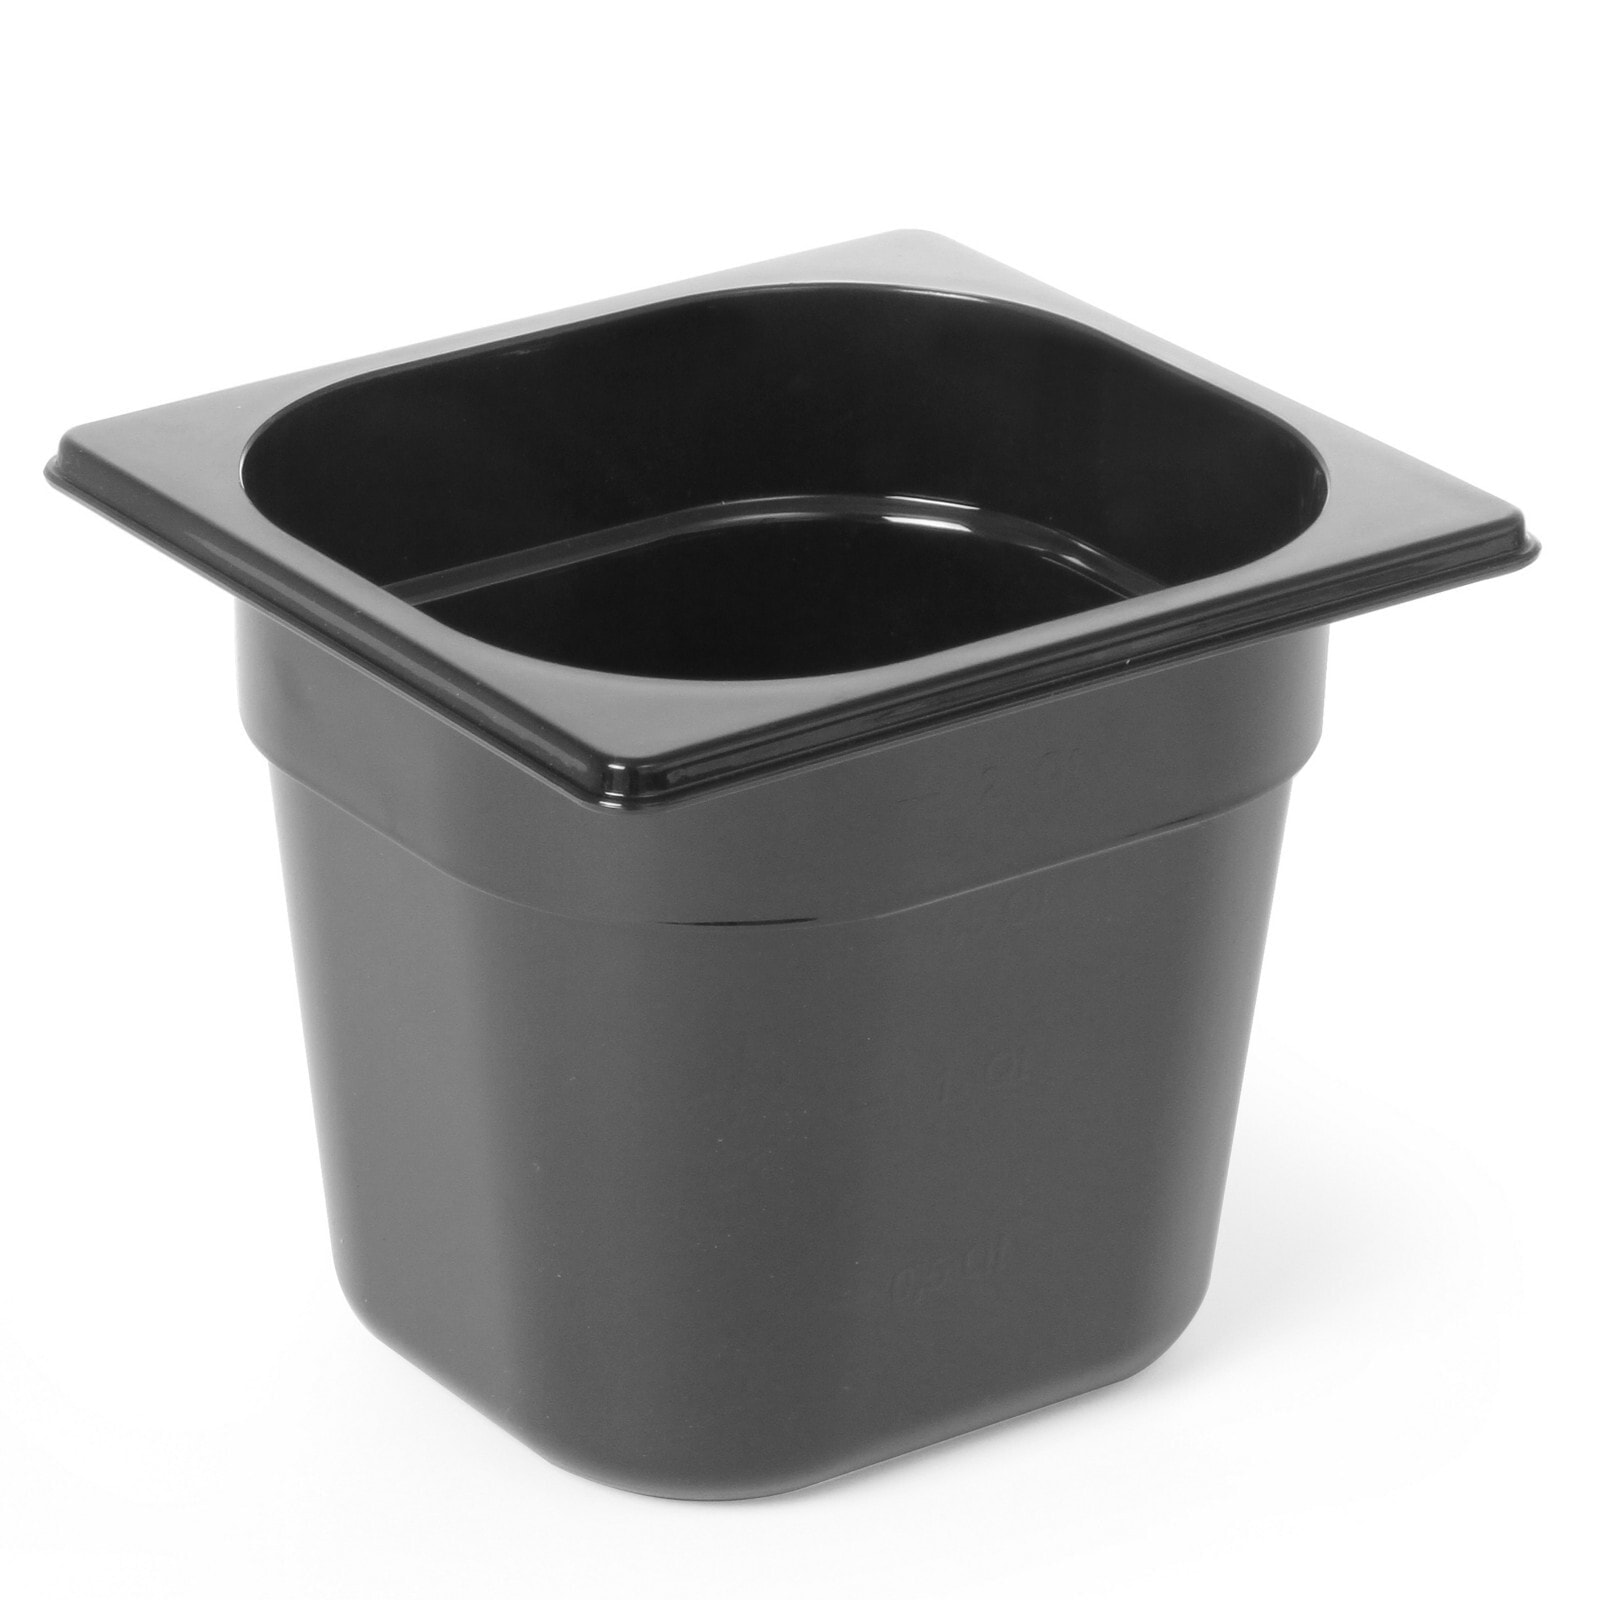 Gastronomy container GN 1/6 made of black polycarbonate 176x162x200mm 3.4L Hendi 862704